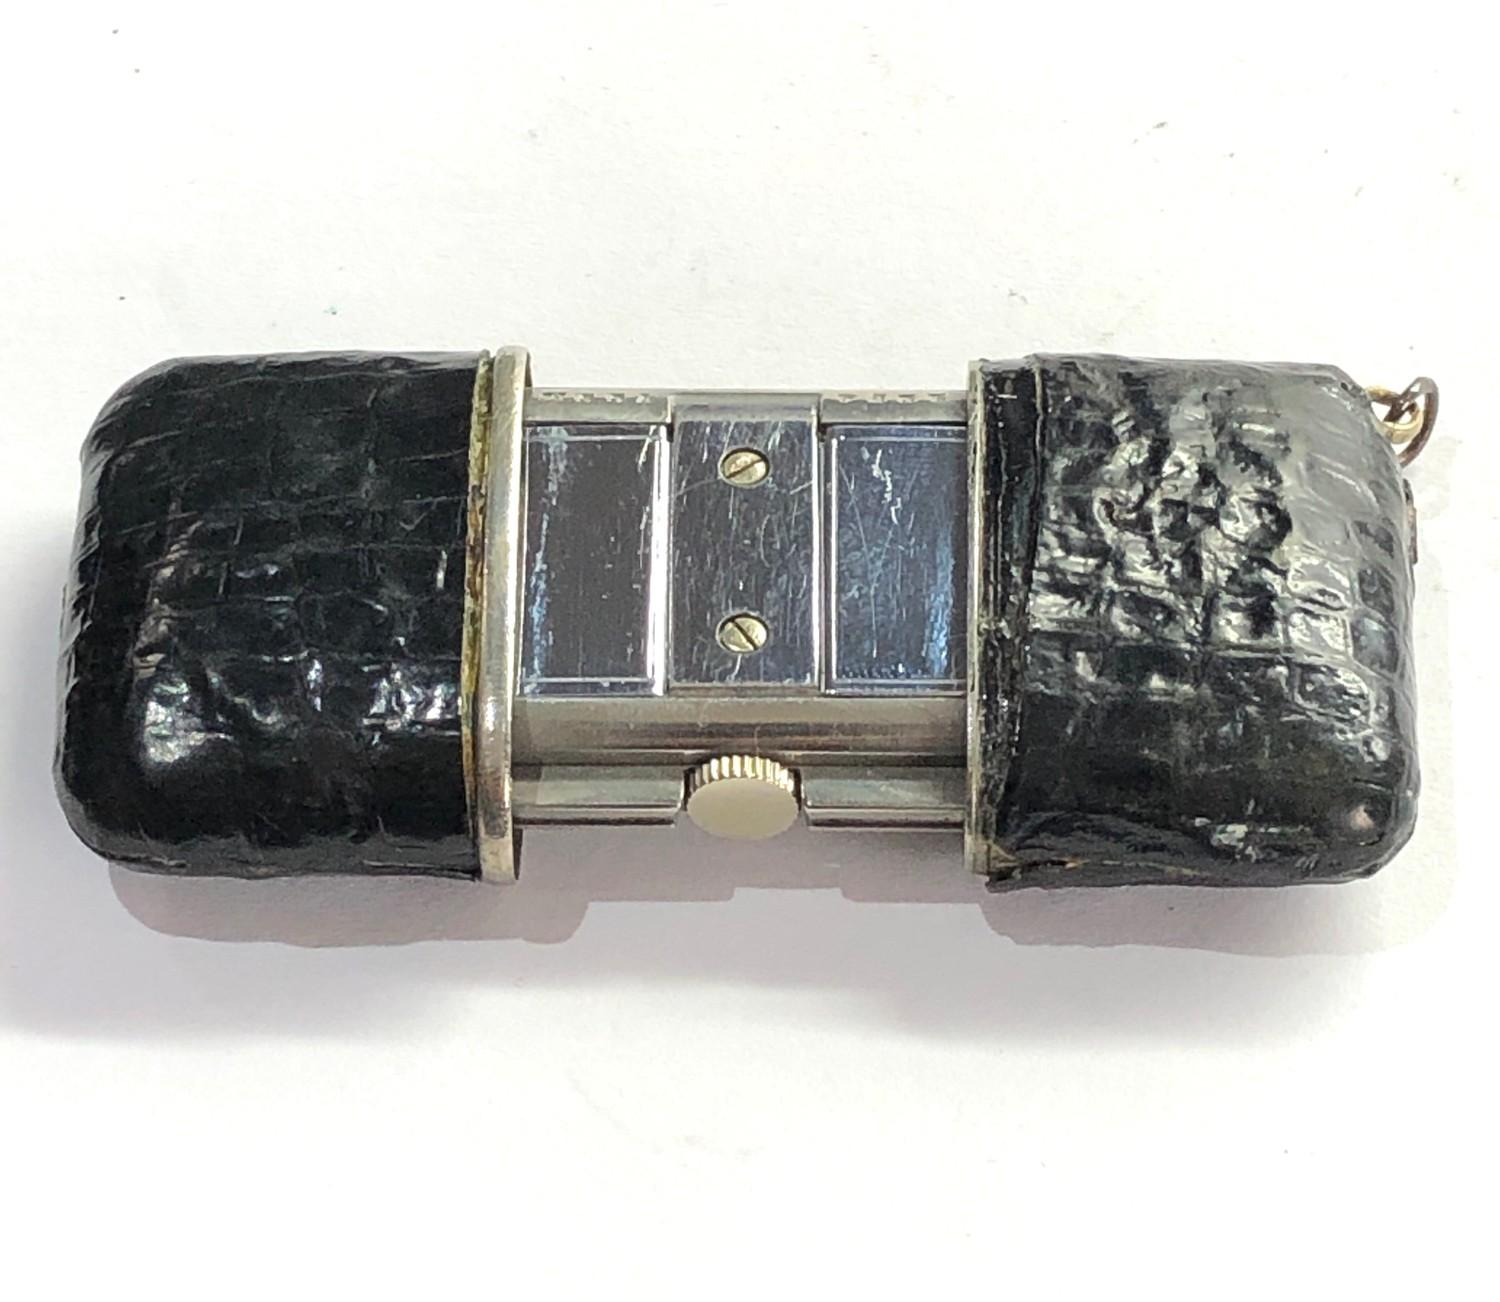 Movado purse watch black leather case the centre second watch is in good working condition shown - Image 3 of 7